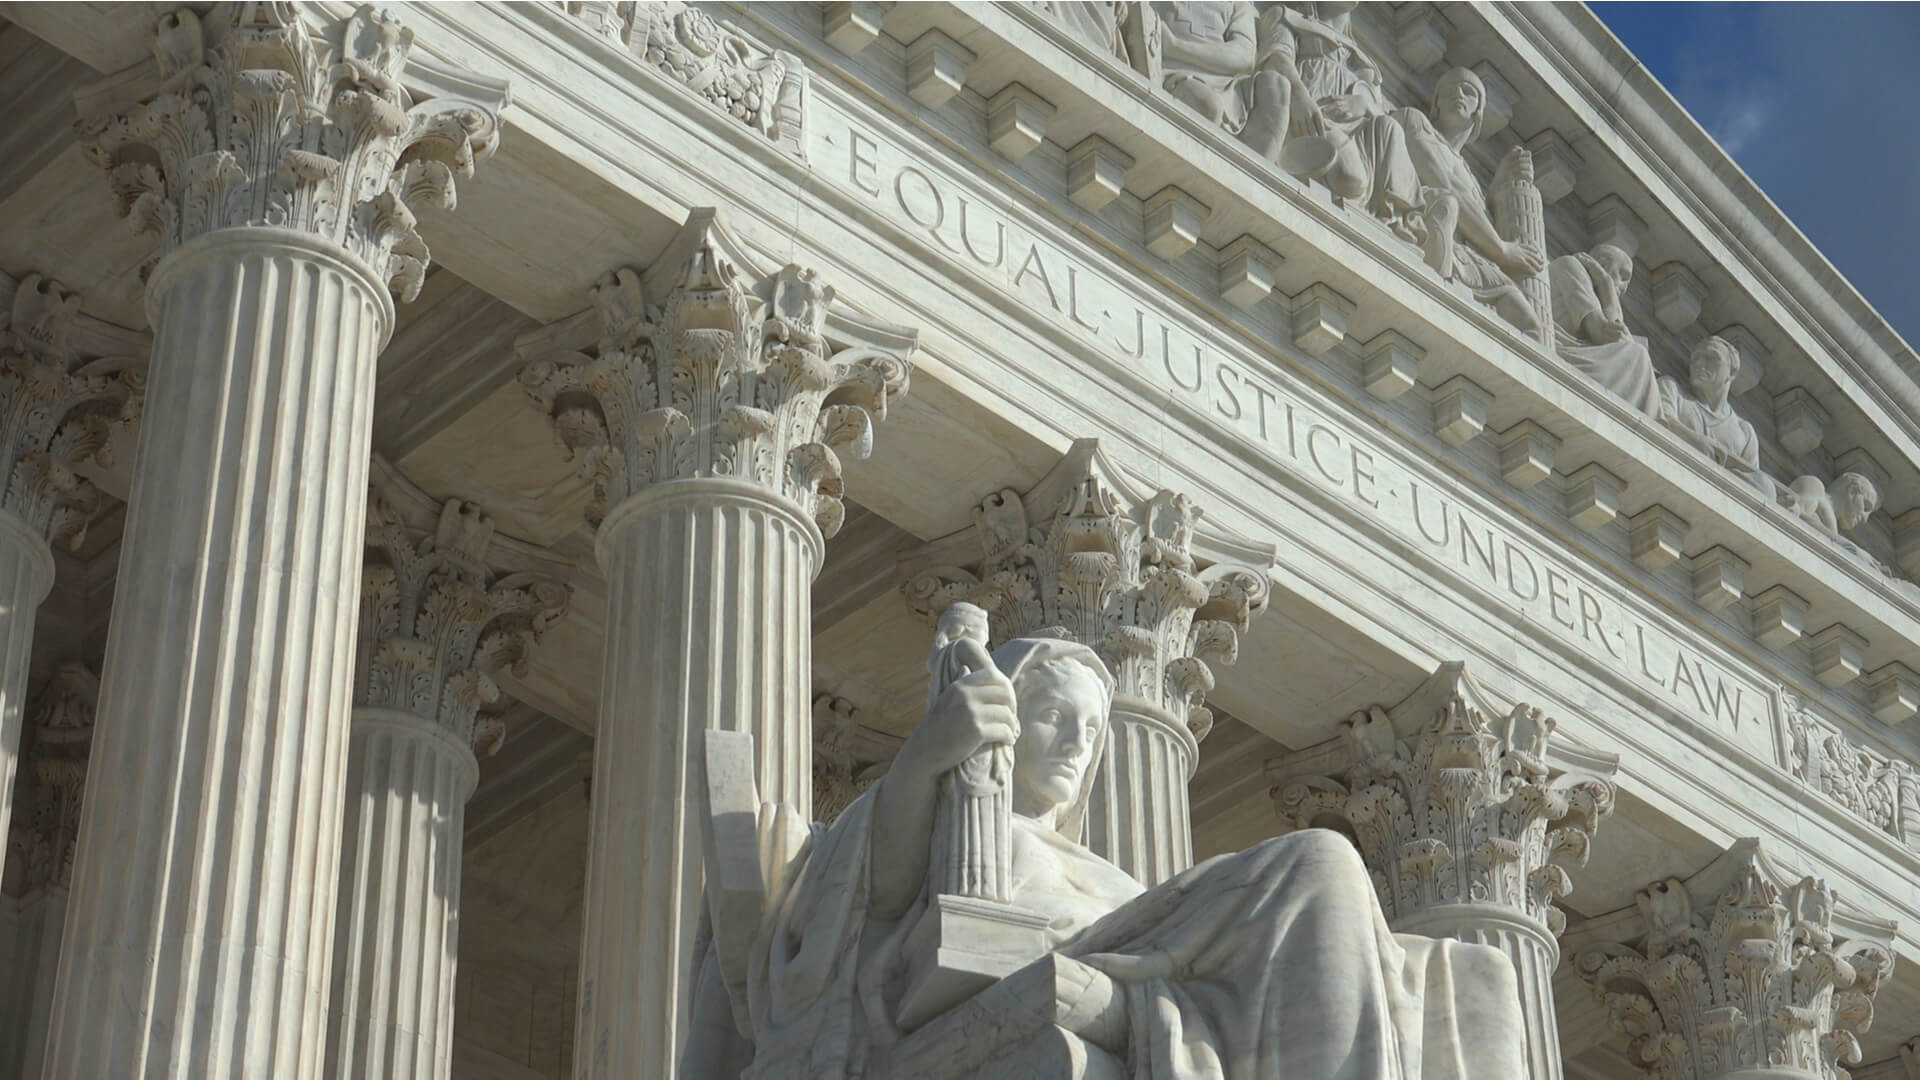 Closeup of the Equal Justice Under Law engraving above entrance to US Supreme Court Building